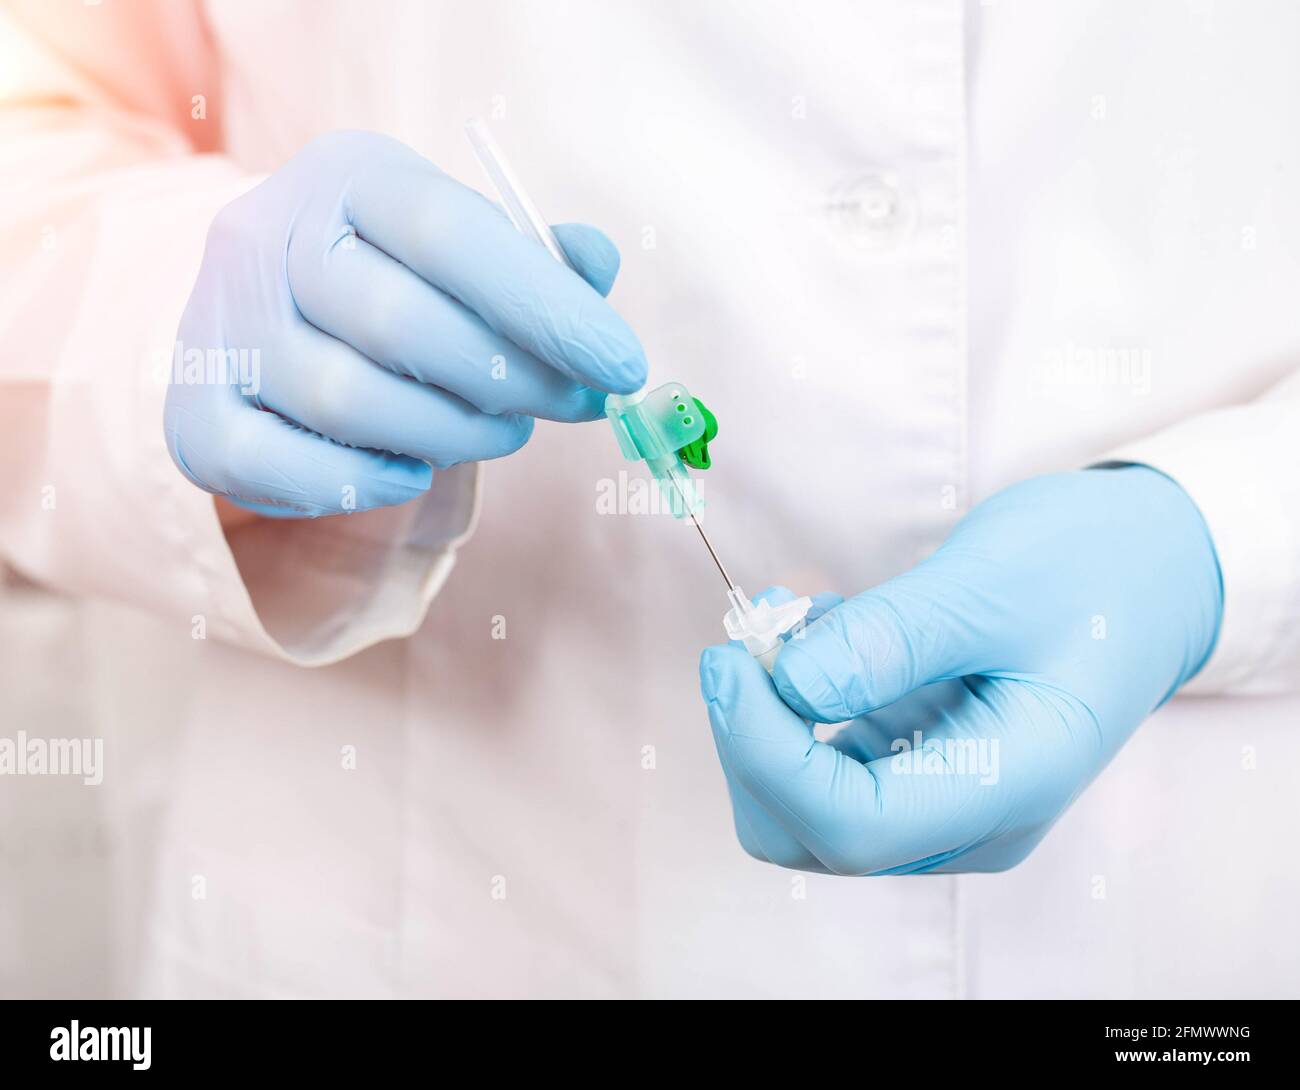 Doctor holds a cannula in his hands which is used in cosmetology and dentistry, close-up, medical procedure Stock Photo